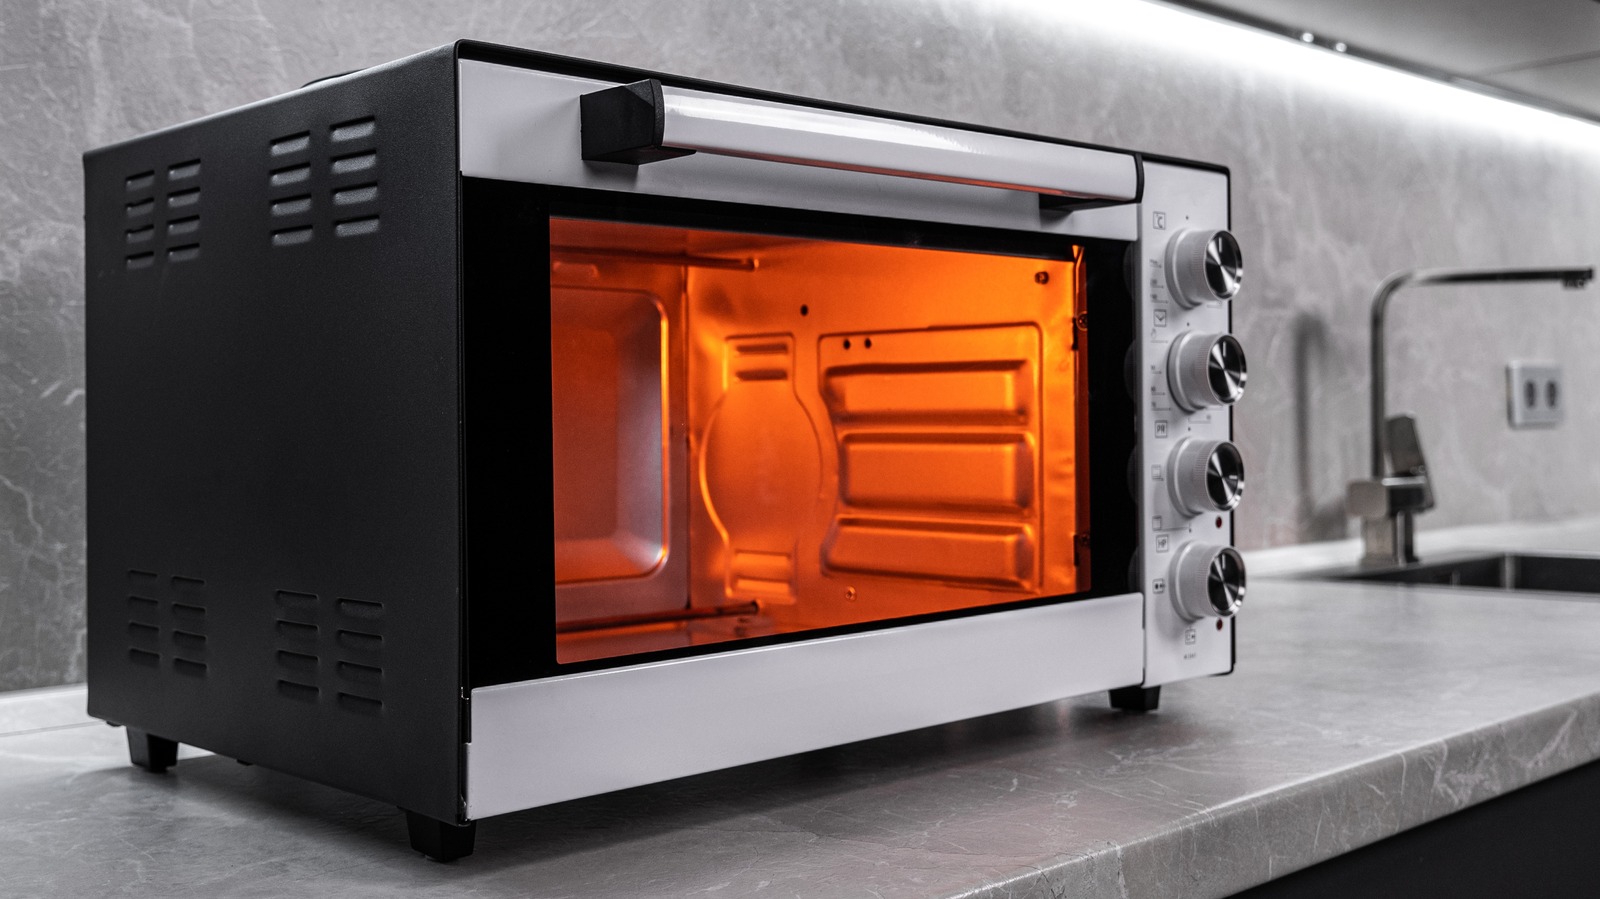 https://www.thedailymeal.com/img/gallery/how-to-properly-clean-that-crumb-filled-toaster-oven/l-intro-1702636720.jpg